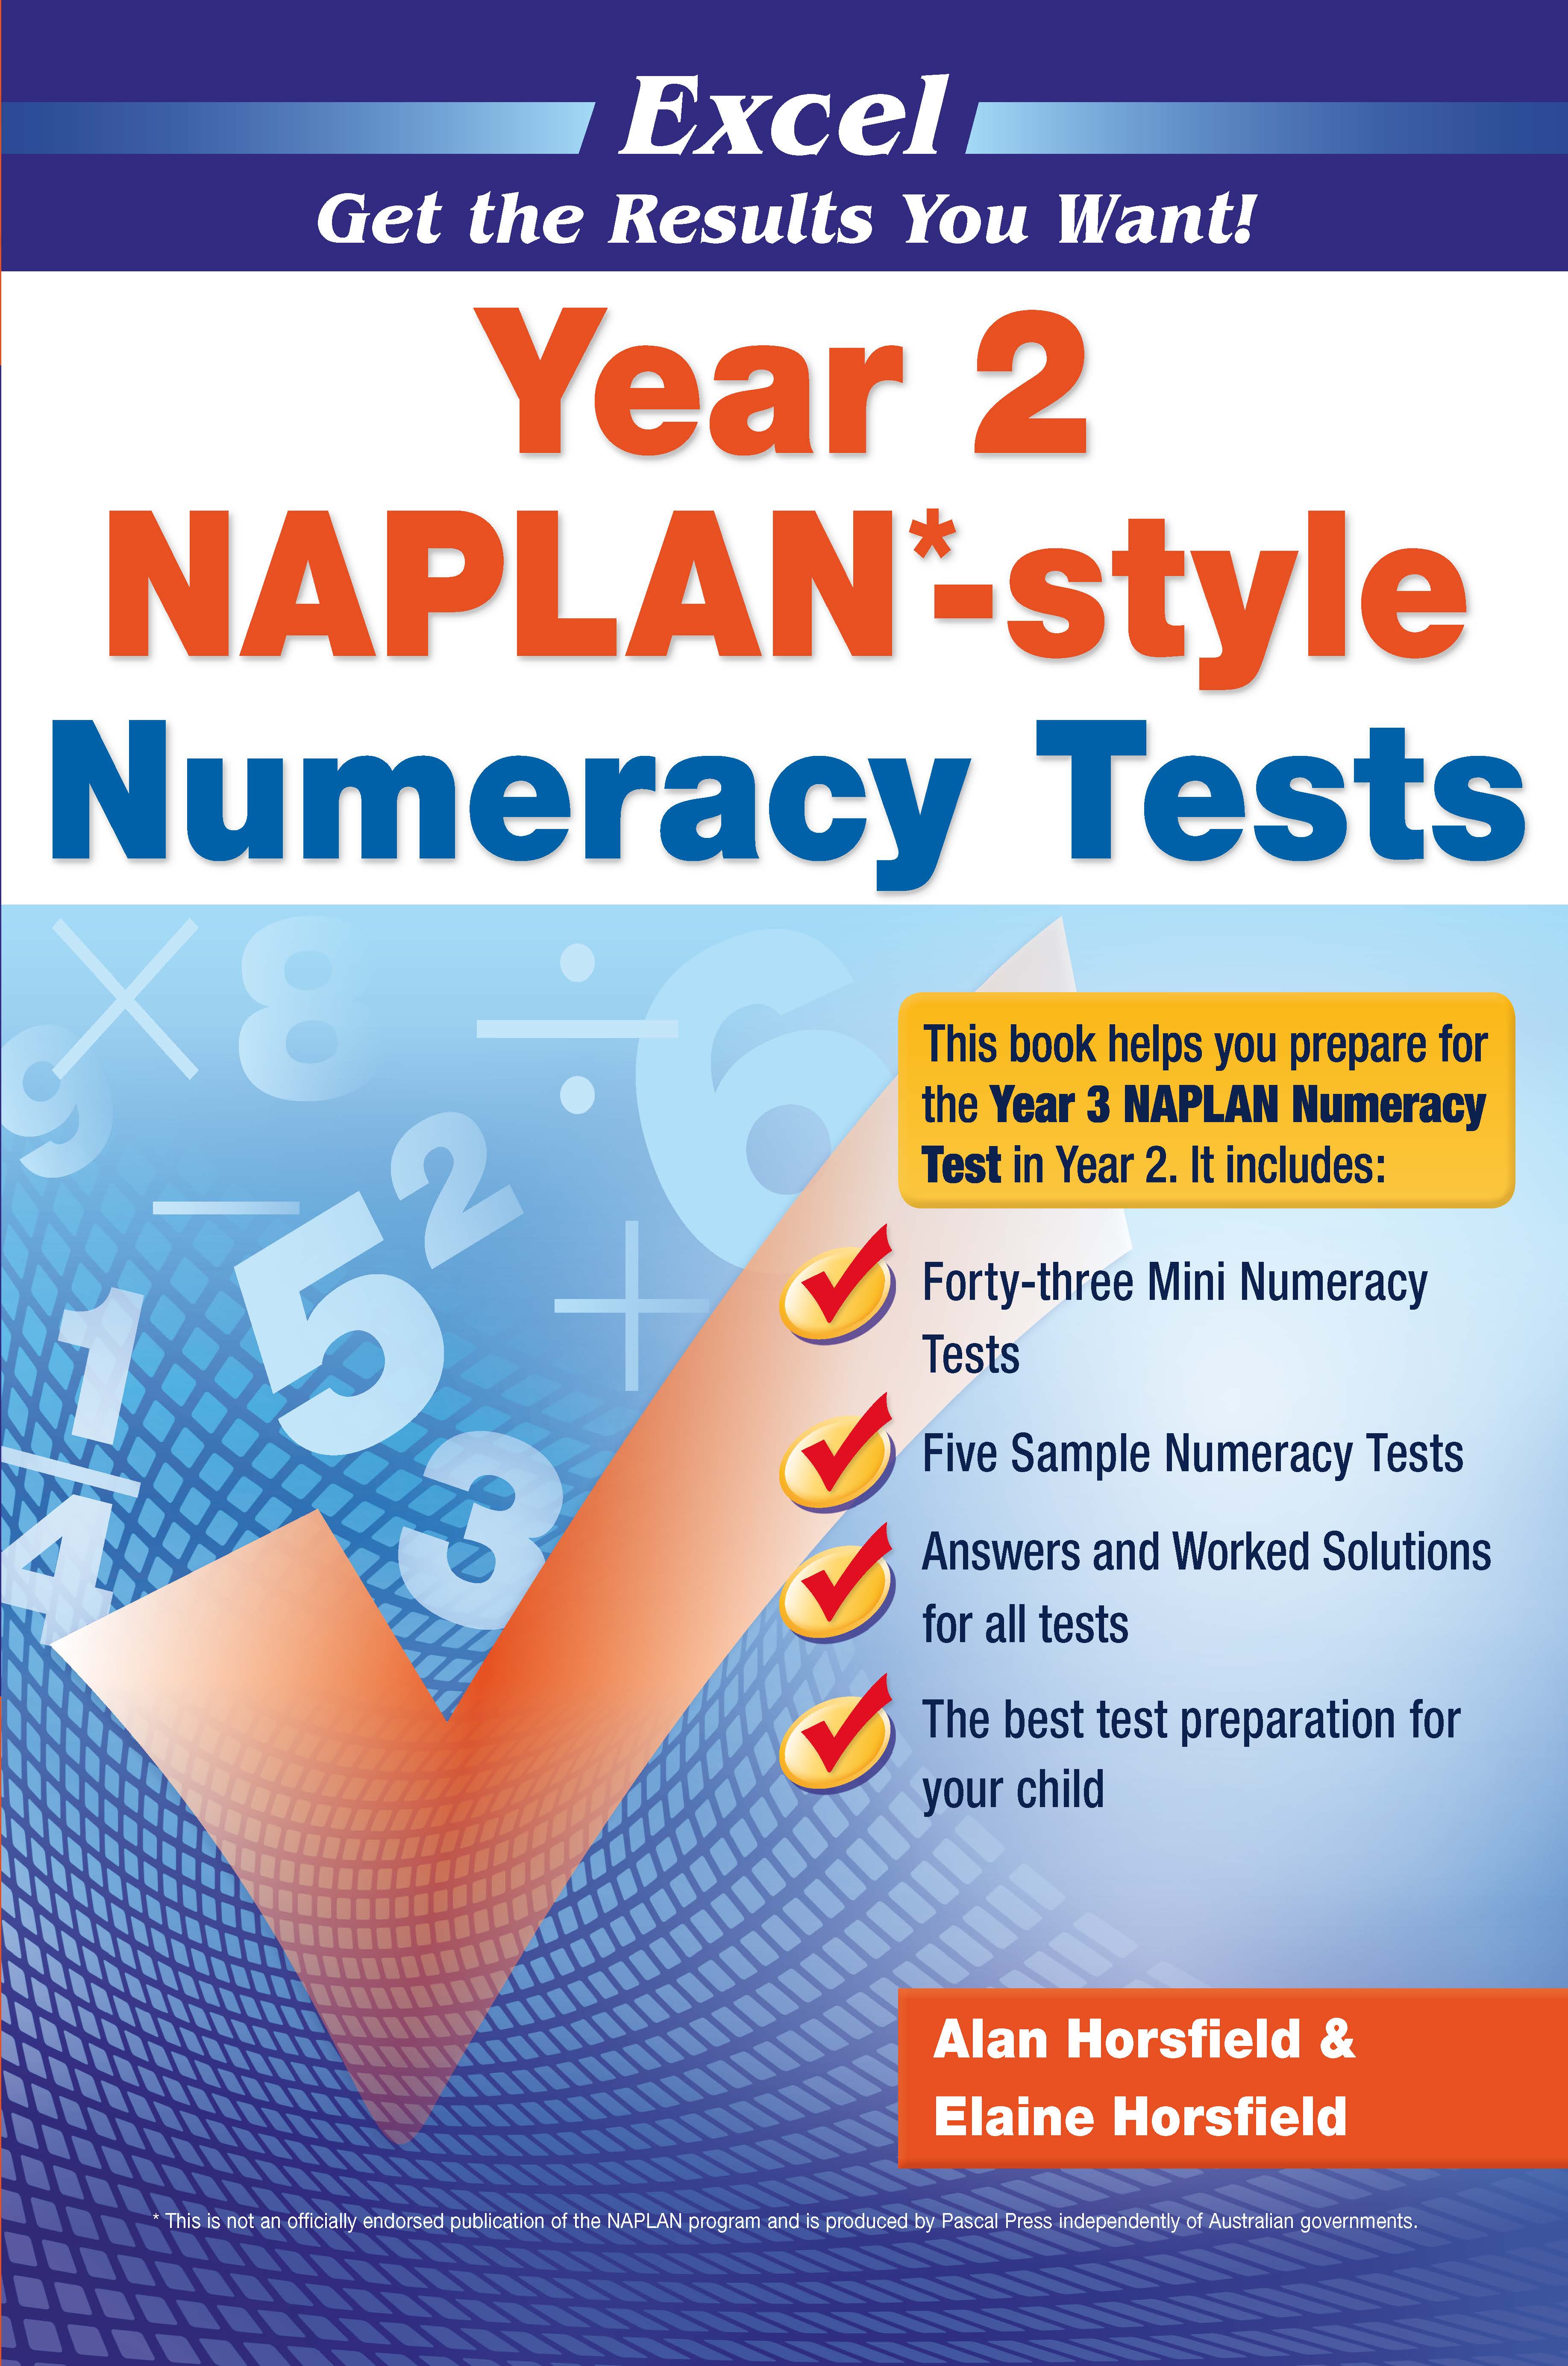 Picture of Excel NAPLAN*-style Numeracy Tests Year 2